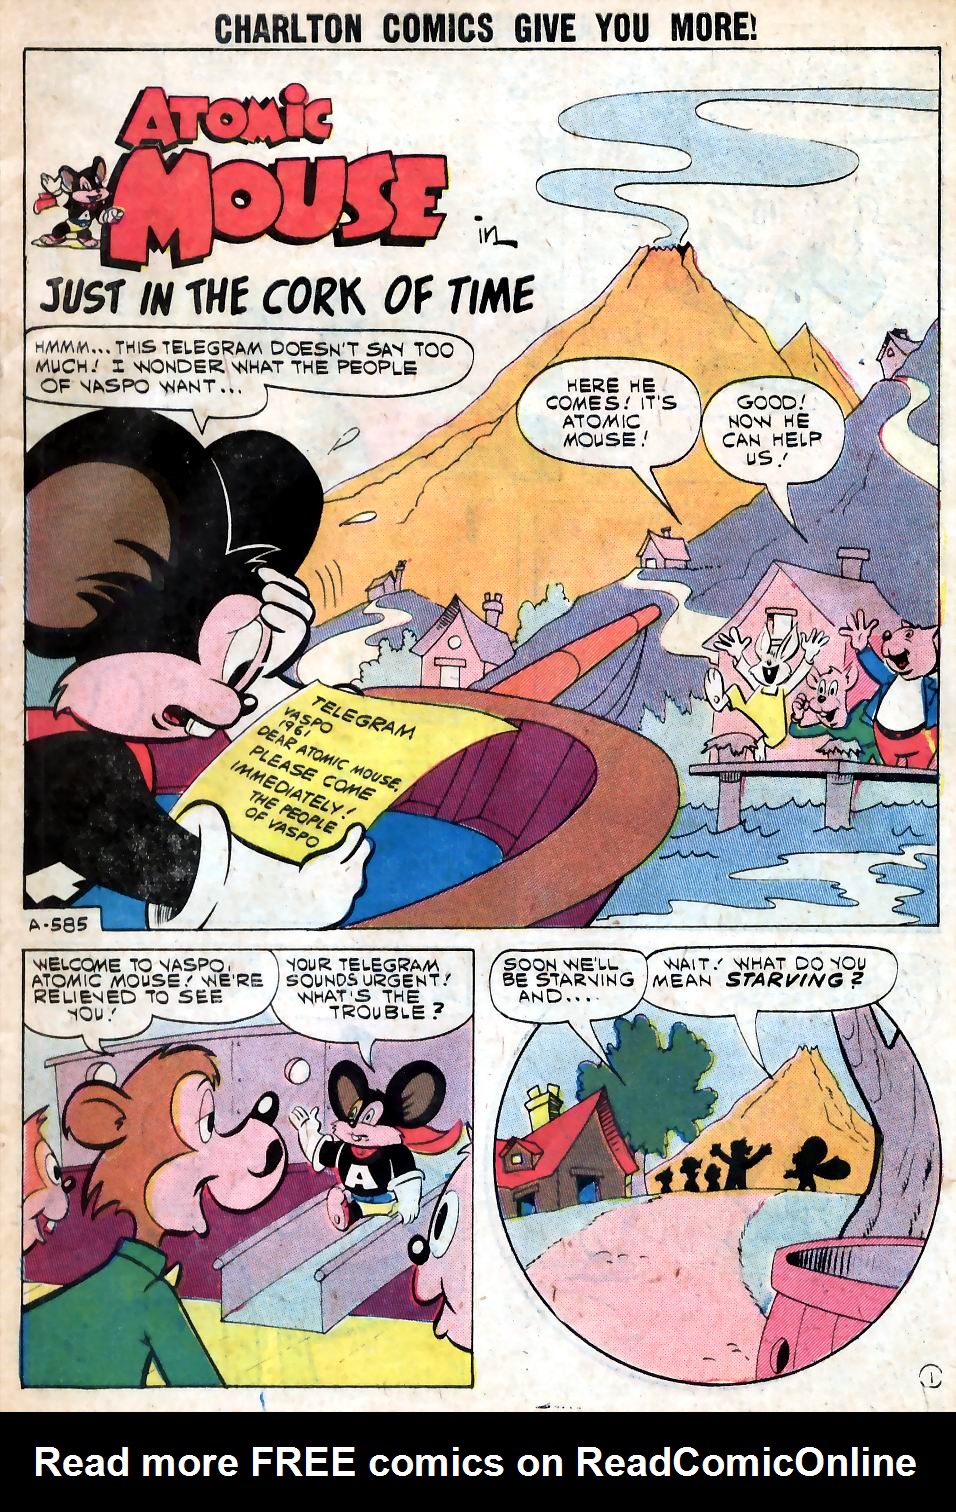 Read online Atomic Mouse comic -  Issue #43 - 3